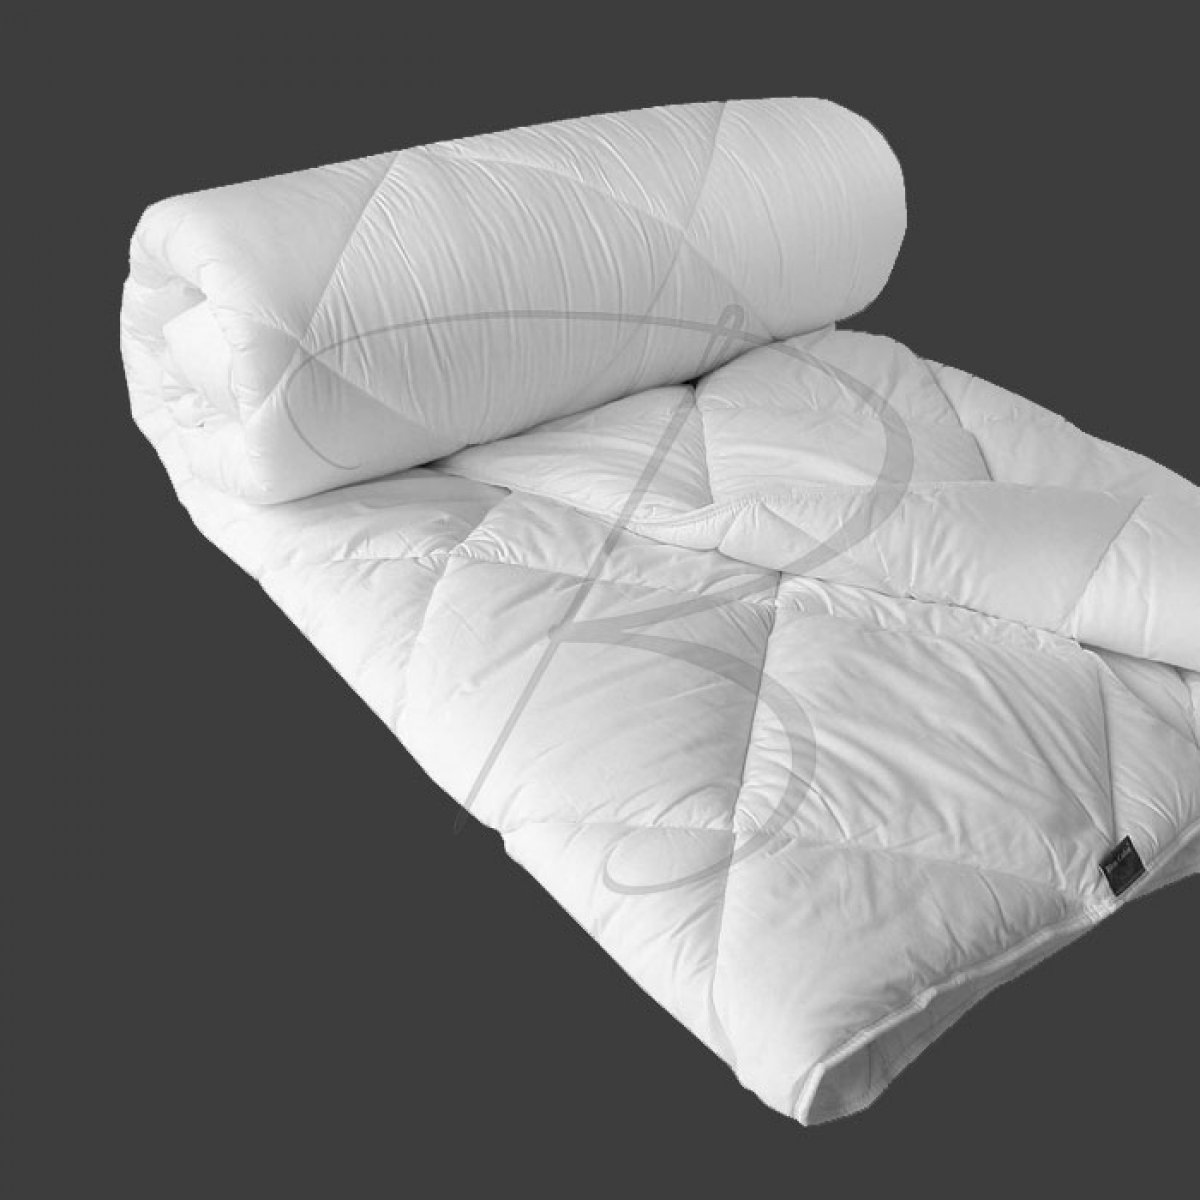 Pyrenees synthetic comforter - 350g/m² - 240 x 220